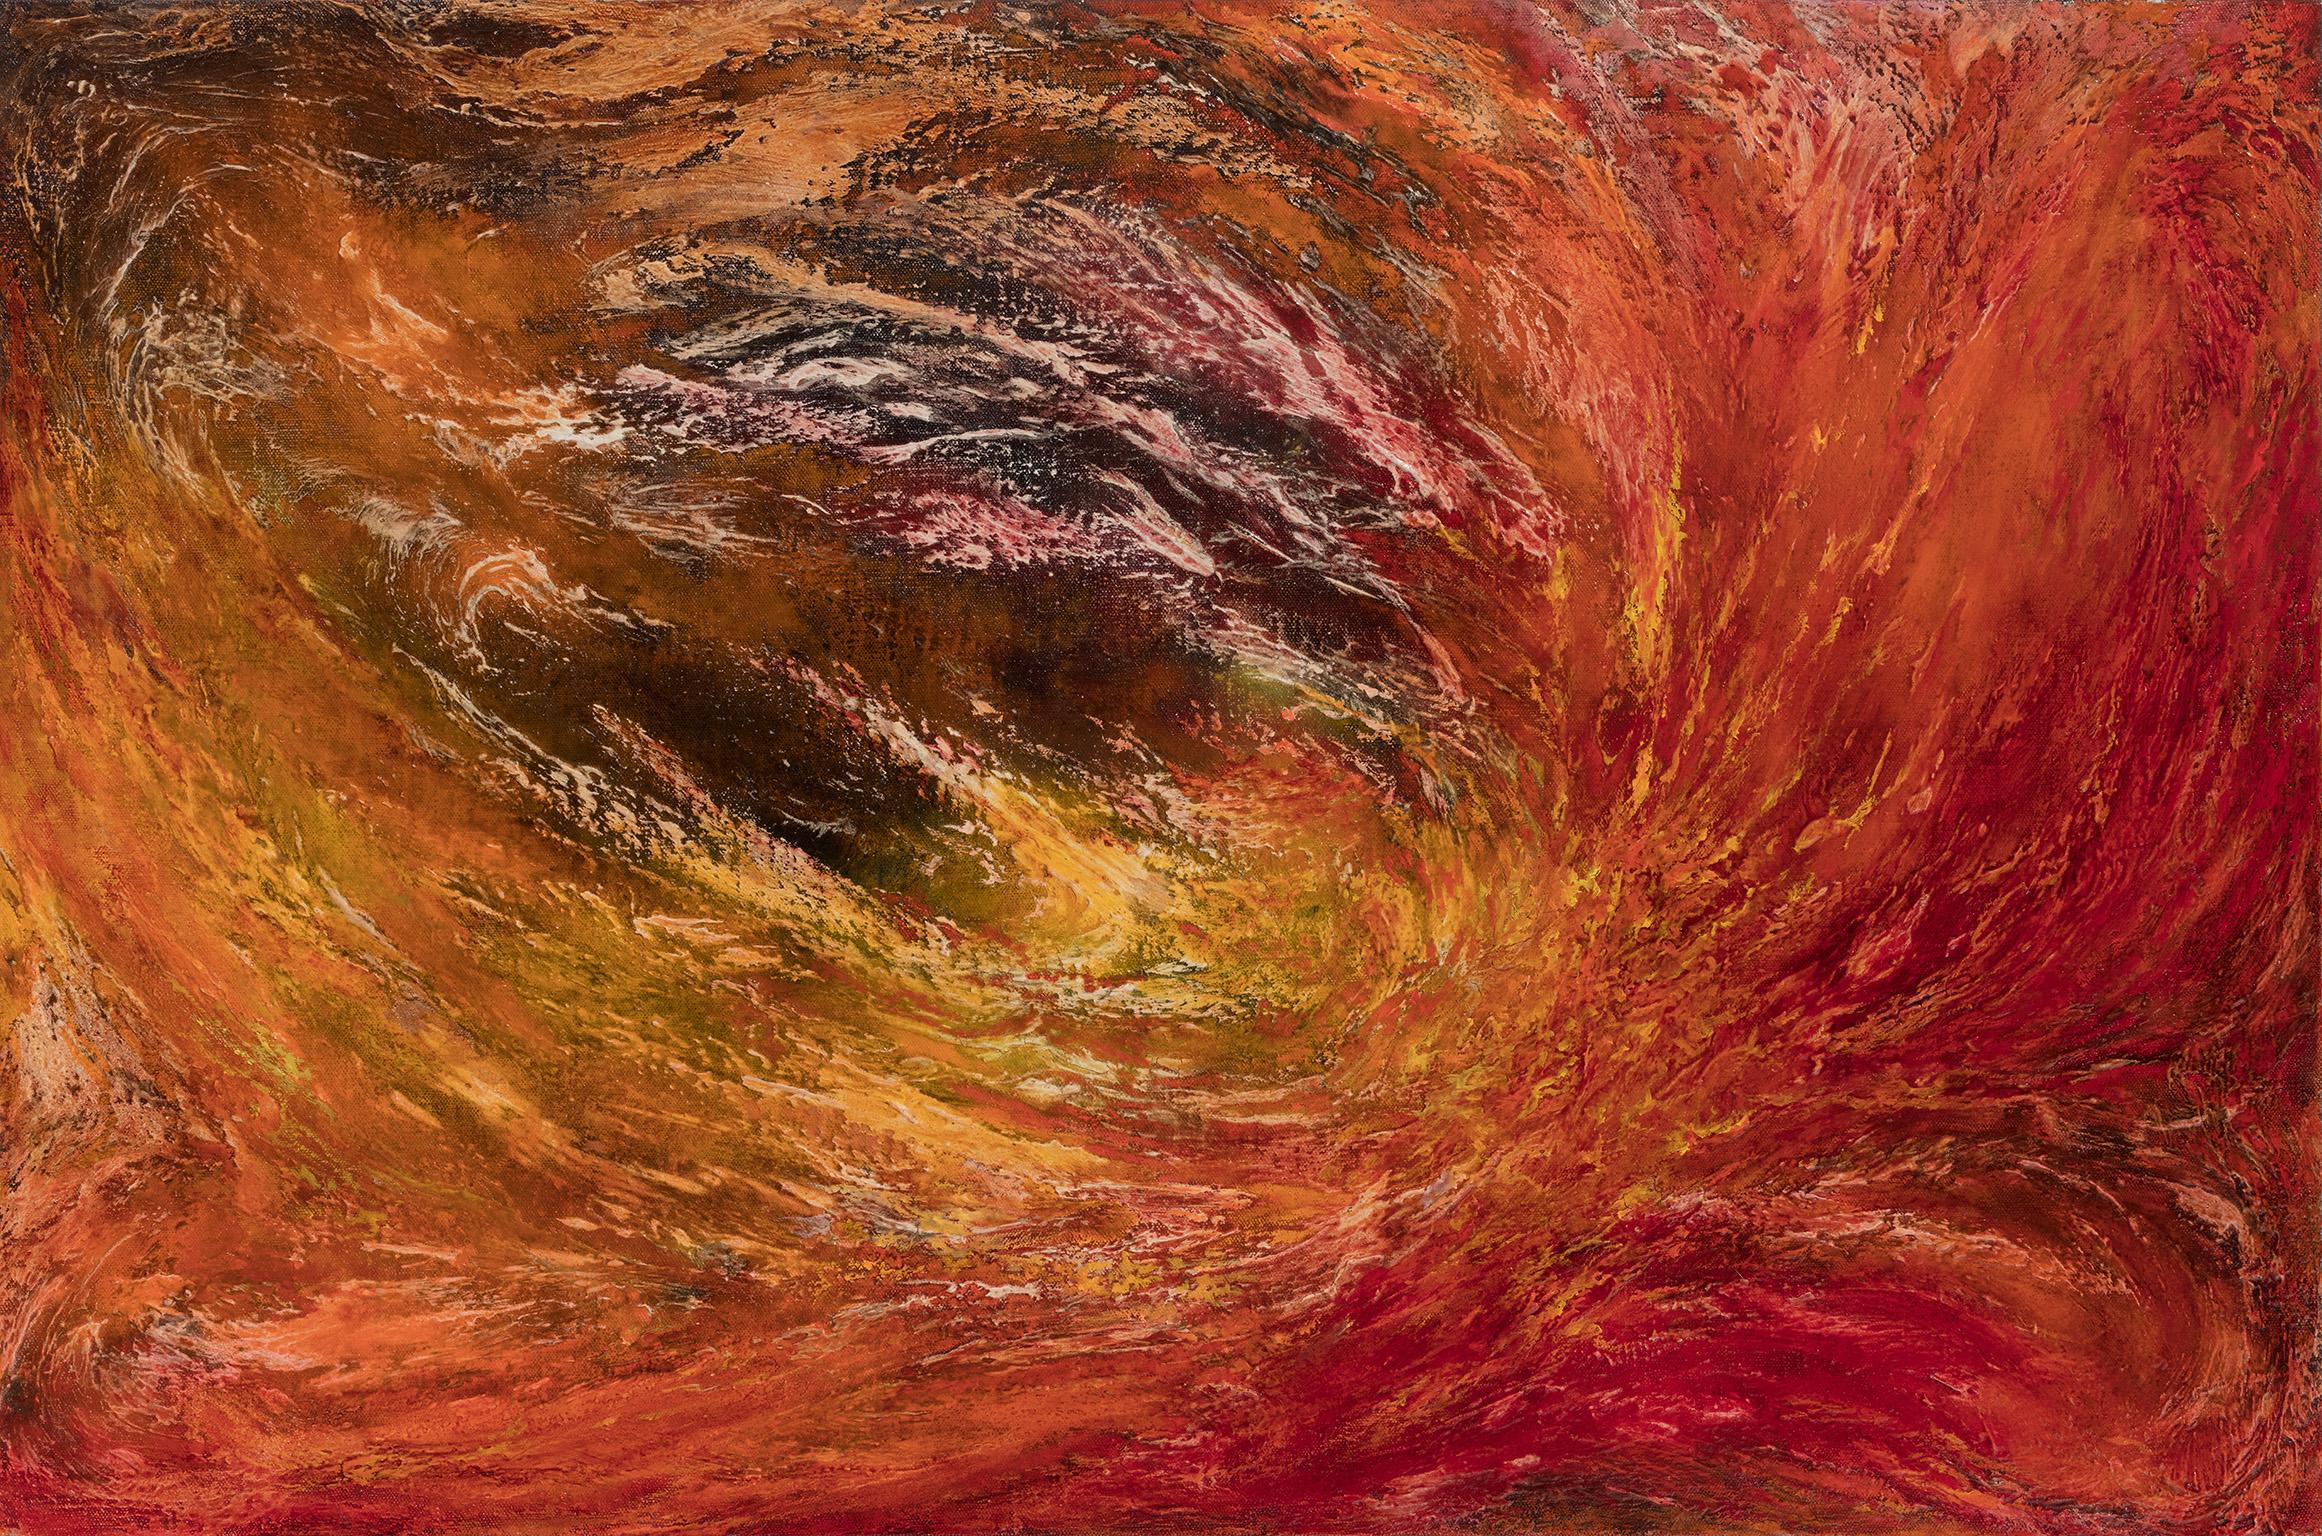 Dies Irae (Day of Wrath) - Abstract Gestural Oil Painting with Red and Orange